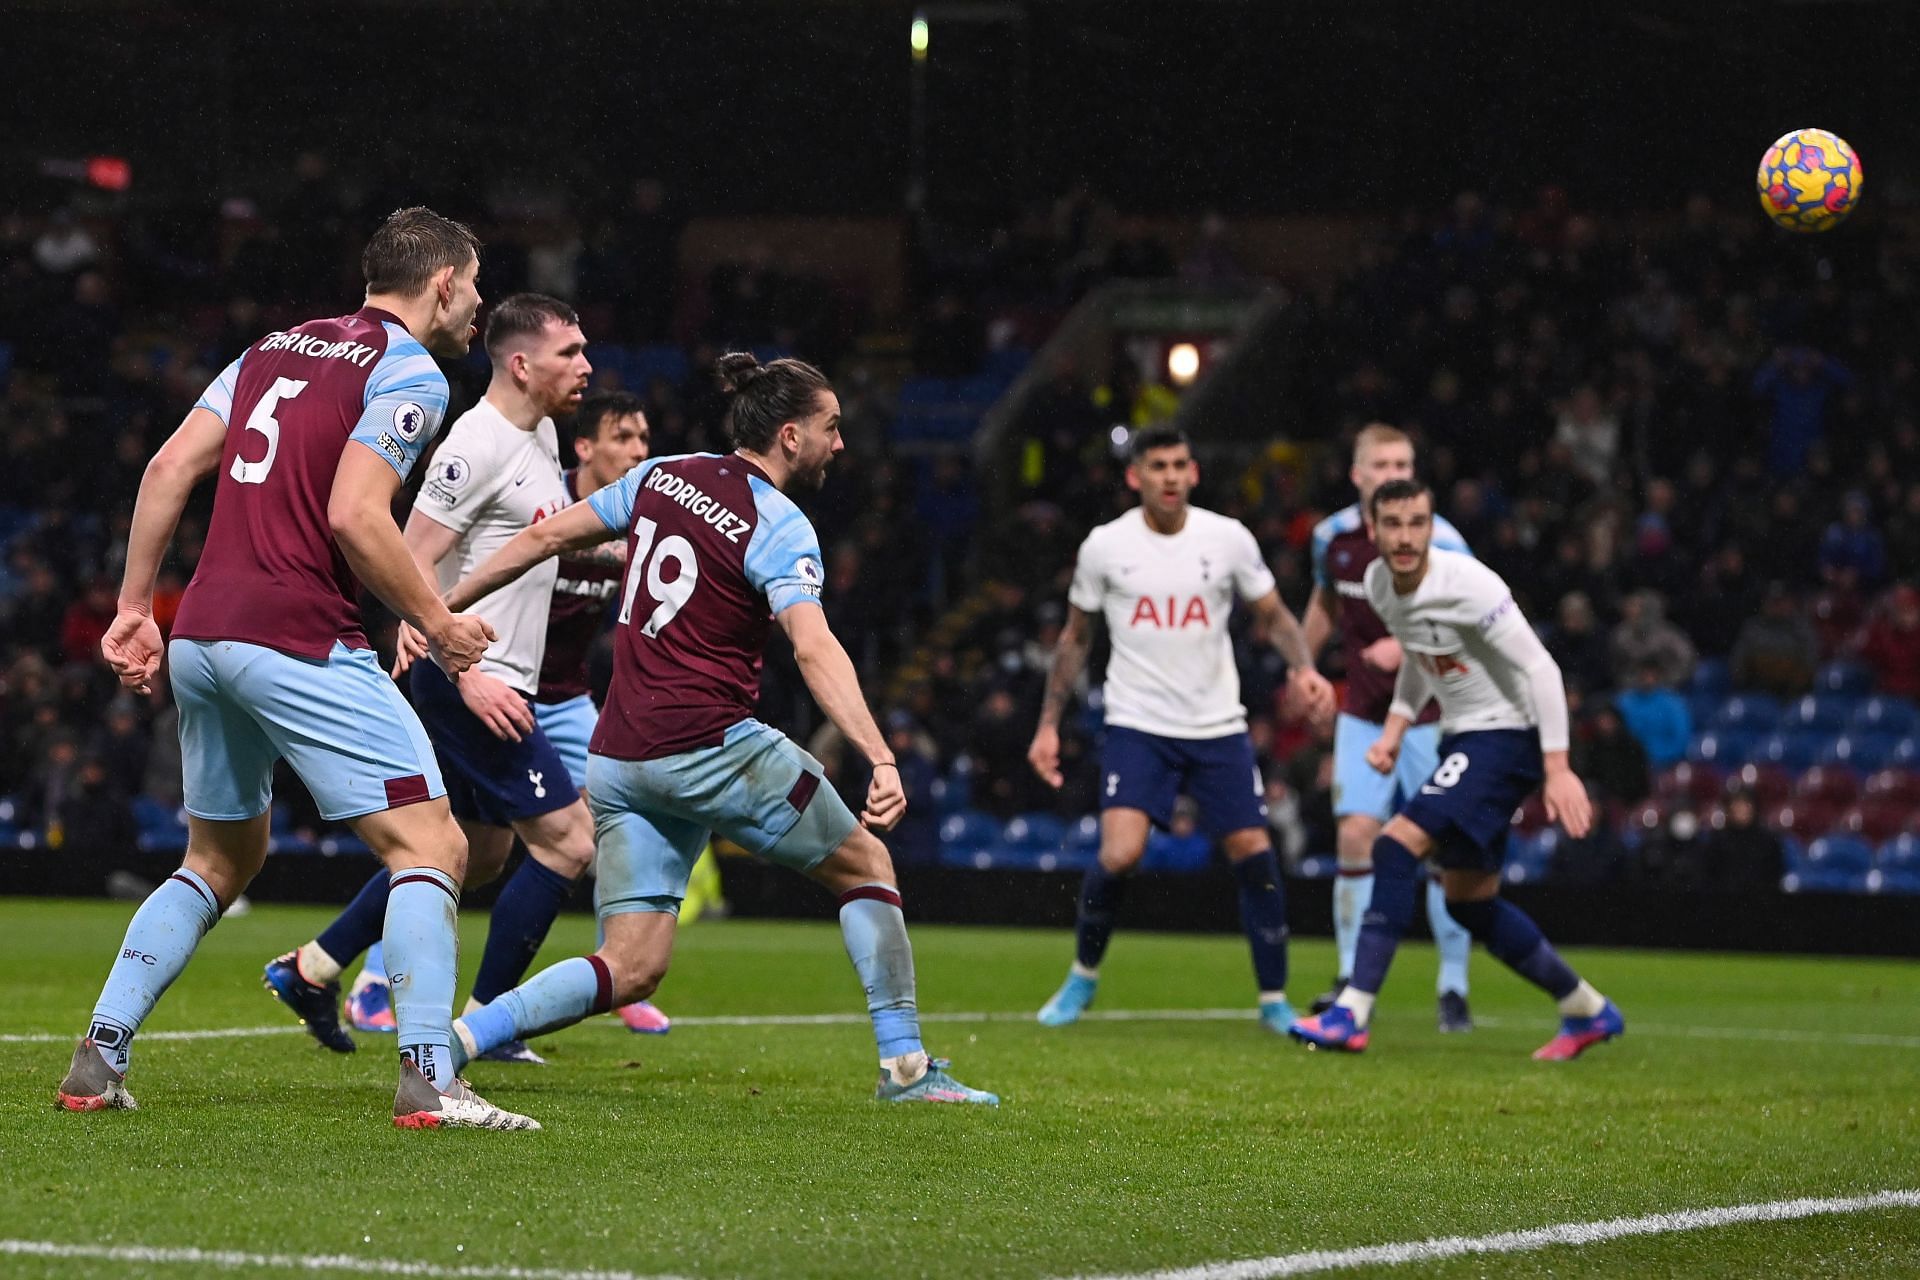 Tottenham fell to a 1-0 defeat against Burnley